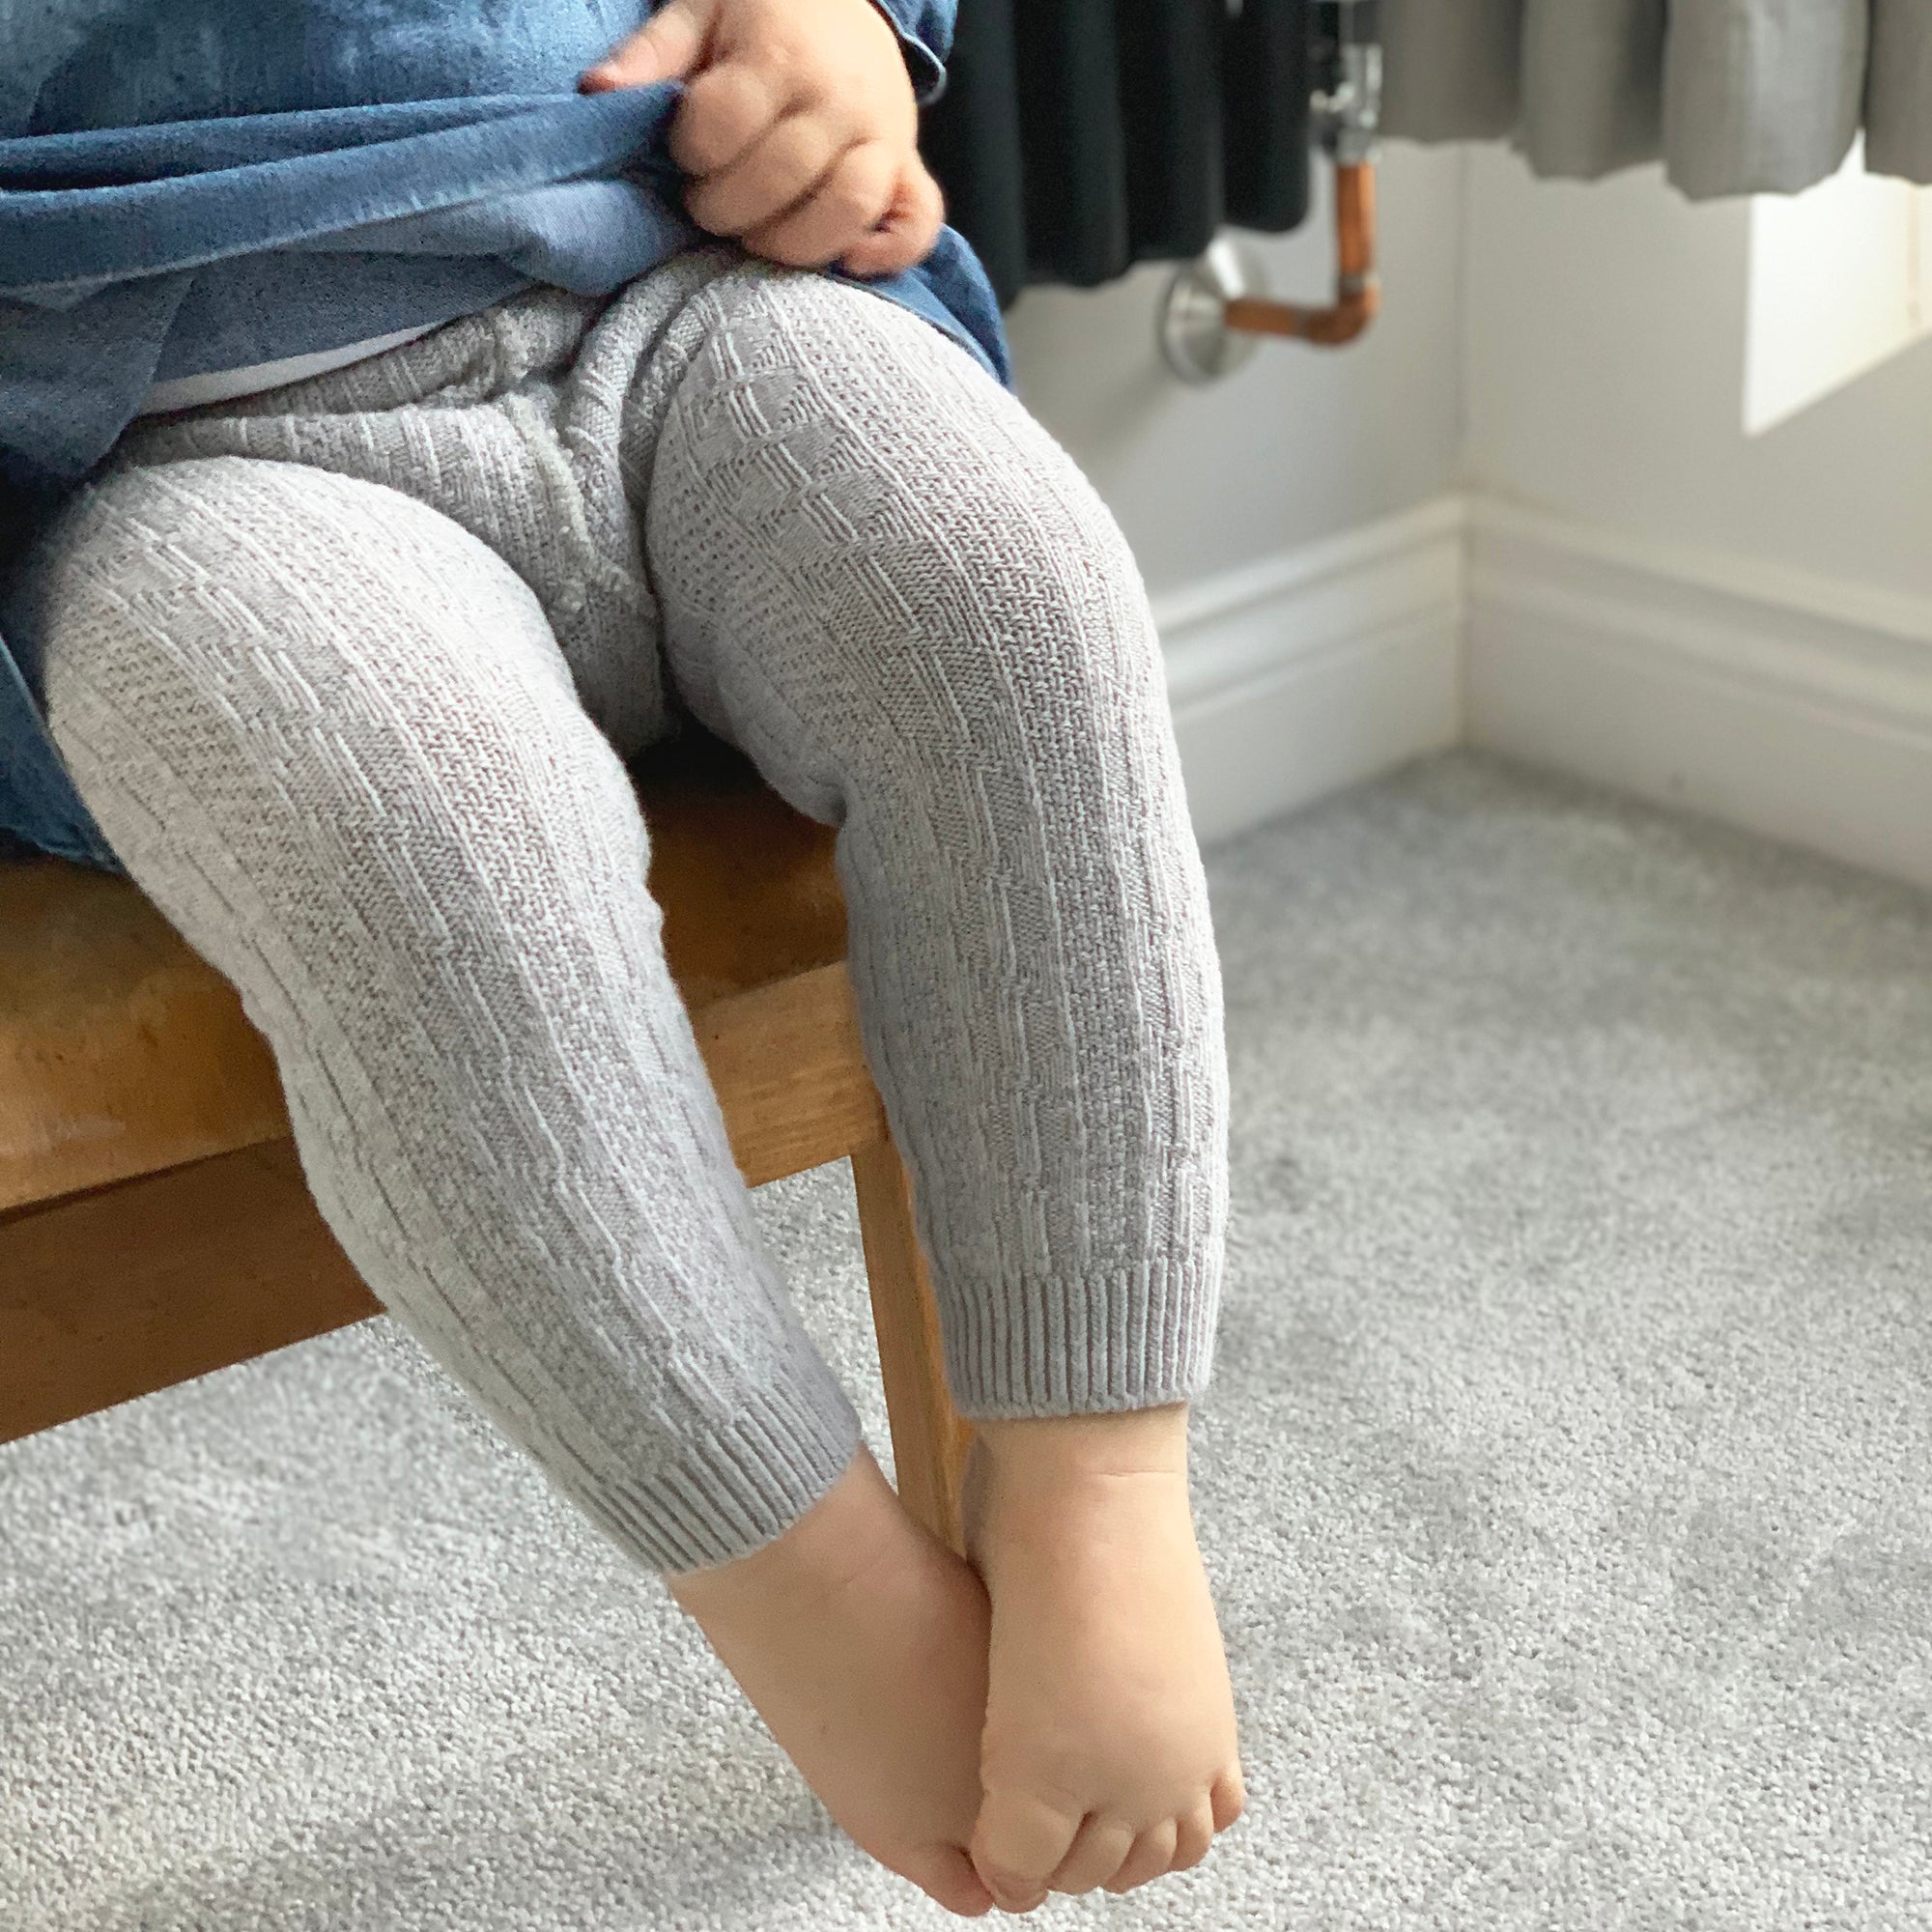 Toddler Infant Leggings Tights 5 Pack – Stretch Is Comfort